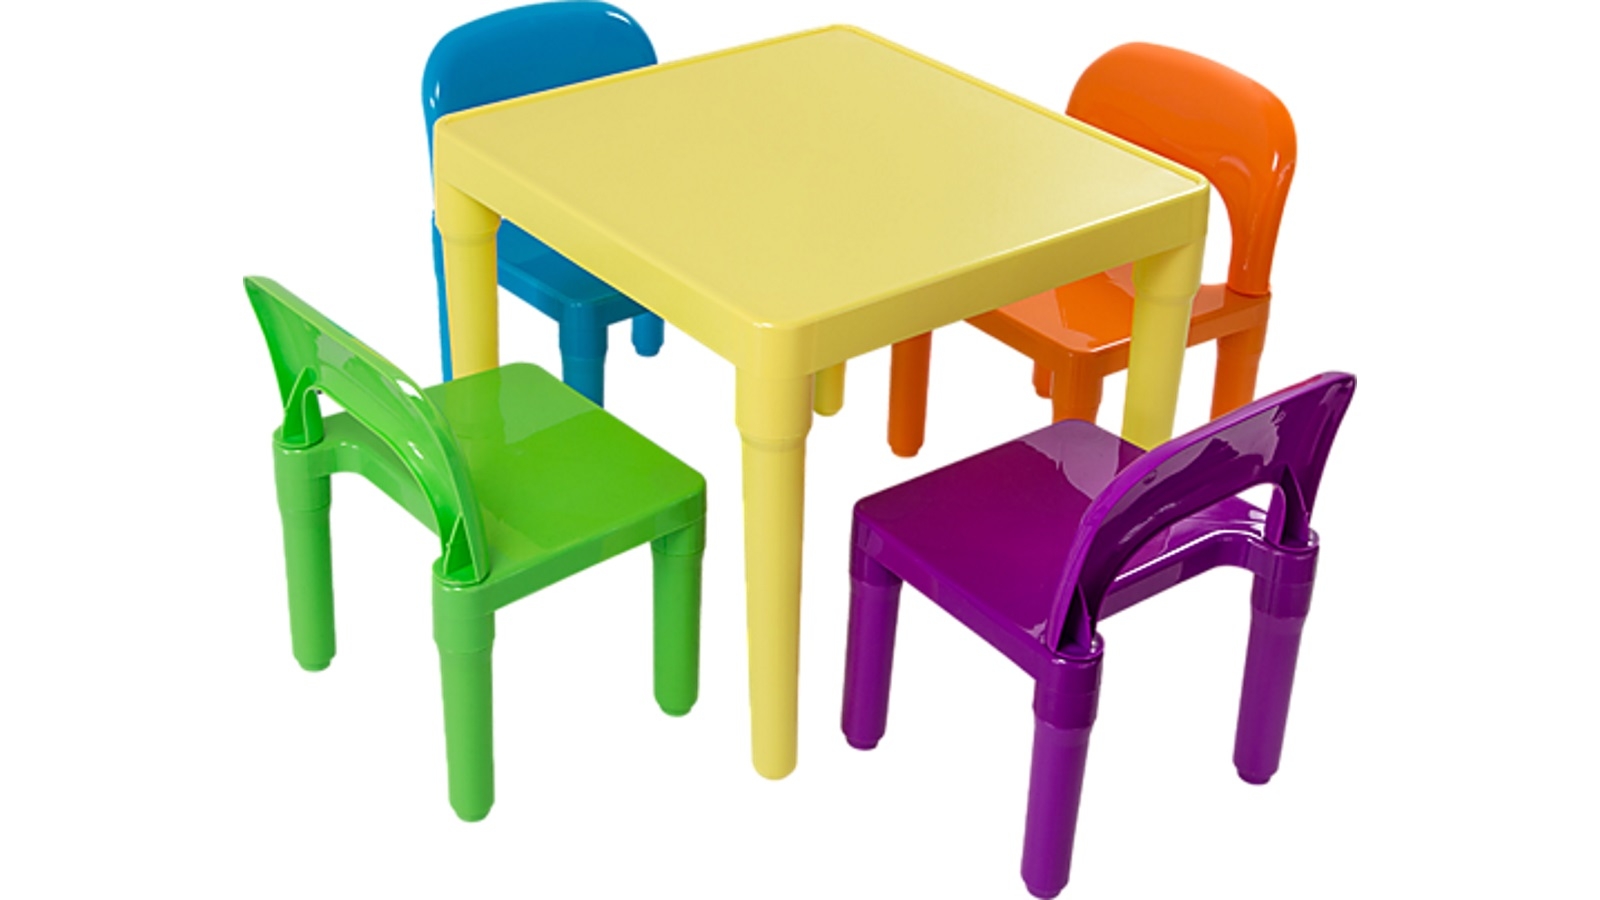 Furniture NEW Toddler Multicoloured Table and Chairs Set Child Play Kids 